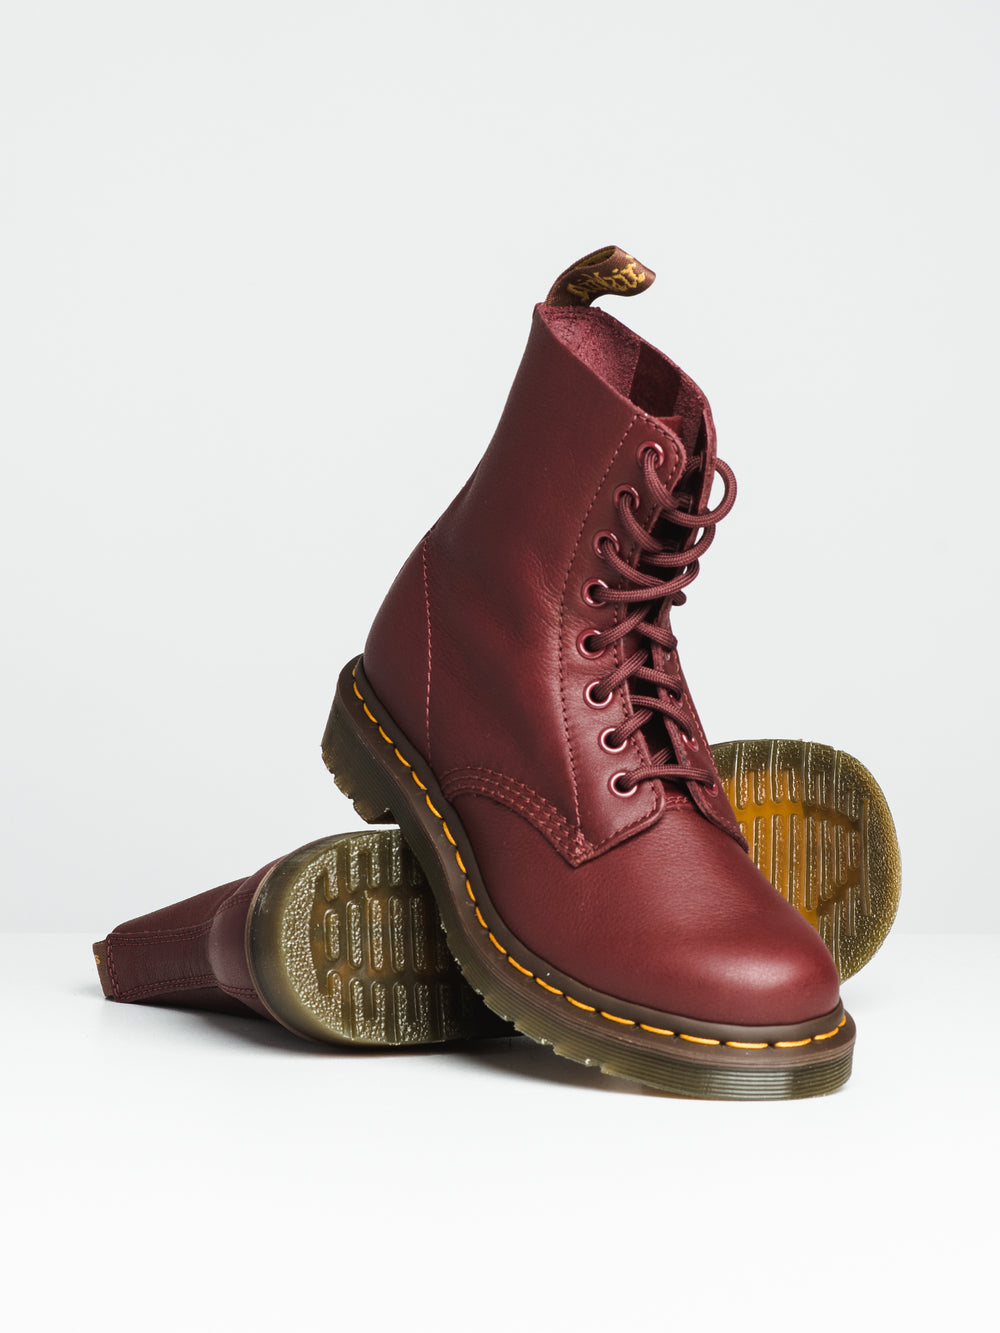 WOMENS DR MARTENS 1460 PASCAL BOOTS - CLEARANCE